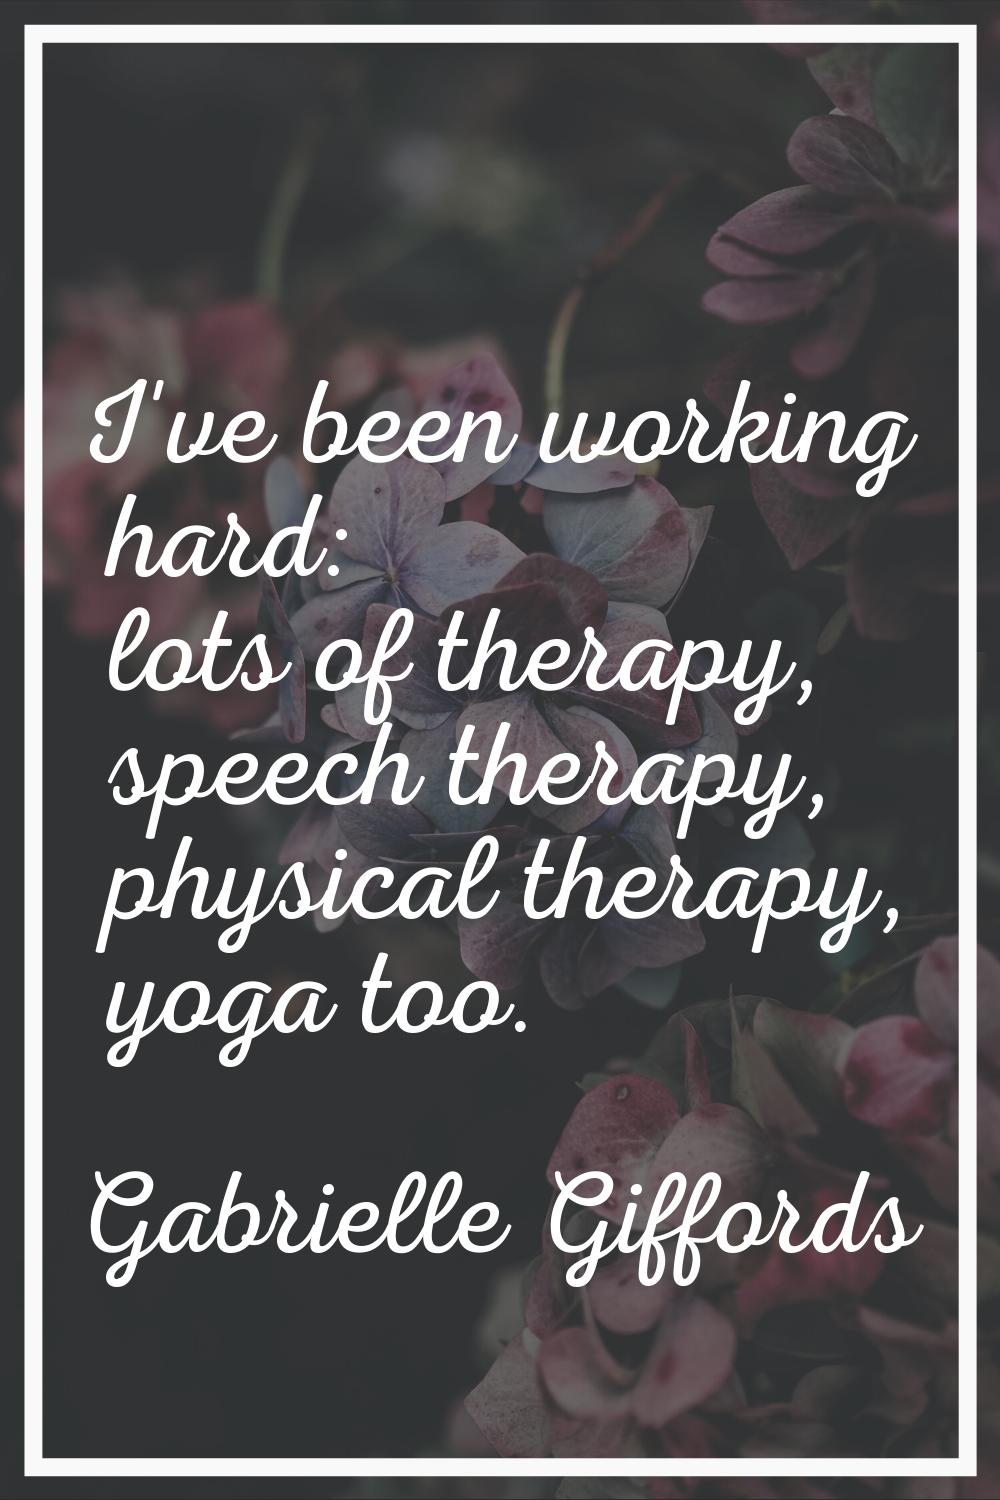 I've been working hard: lots of therapy, speech therapy, physical therapy, yoga too.